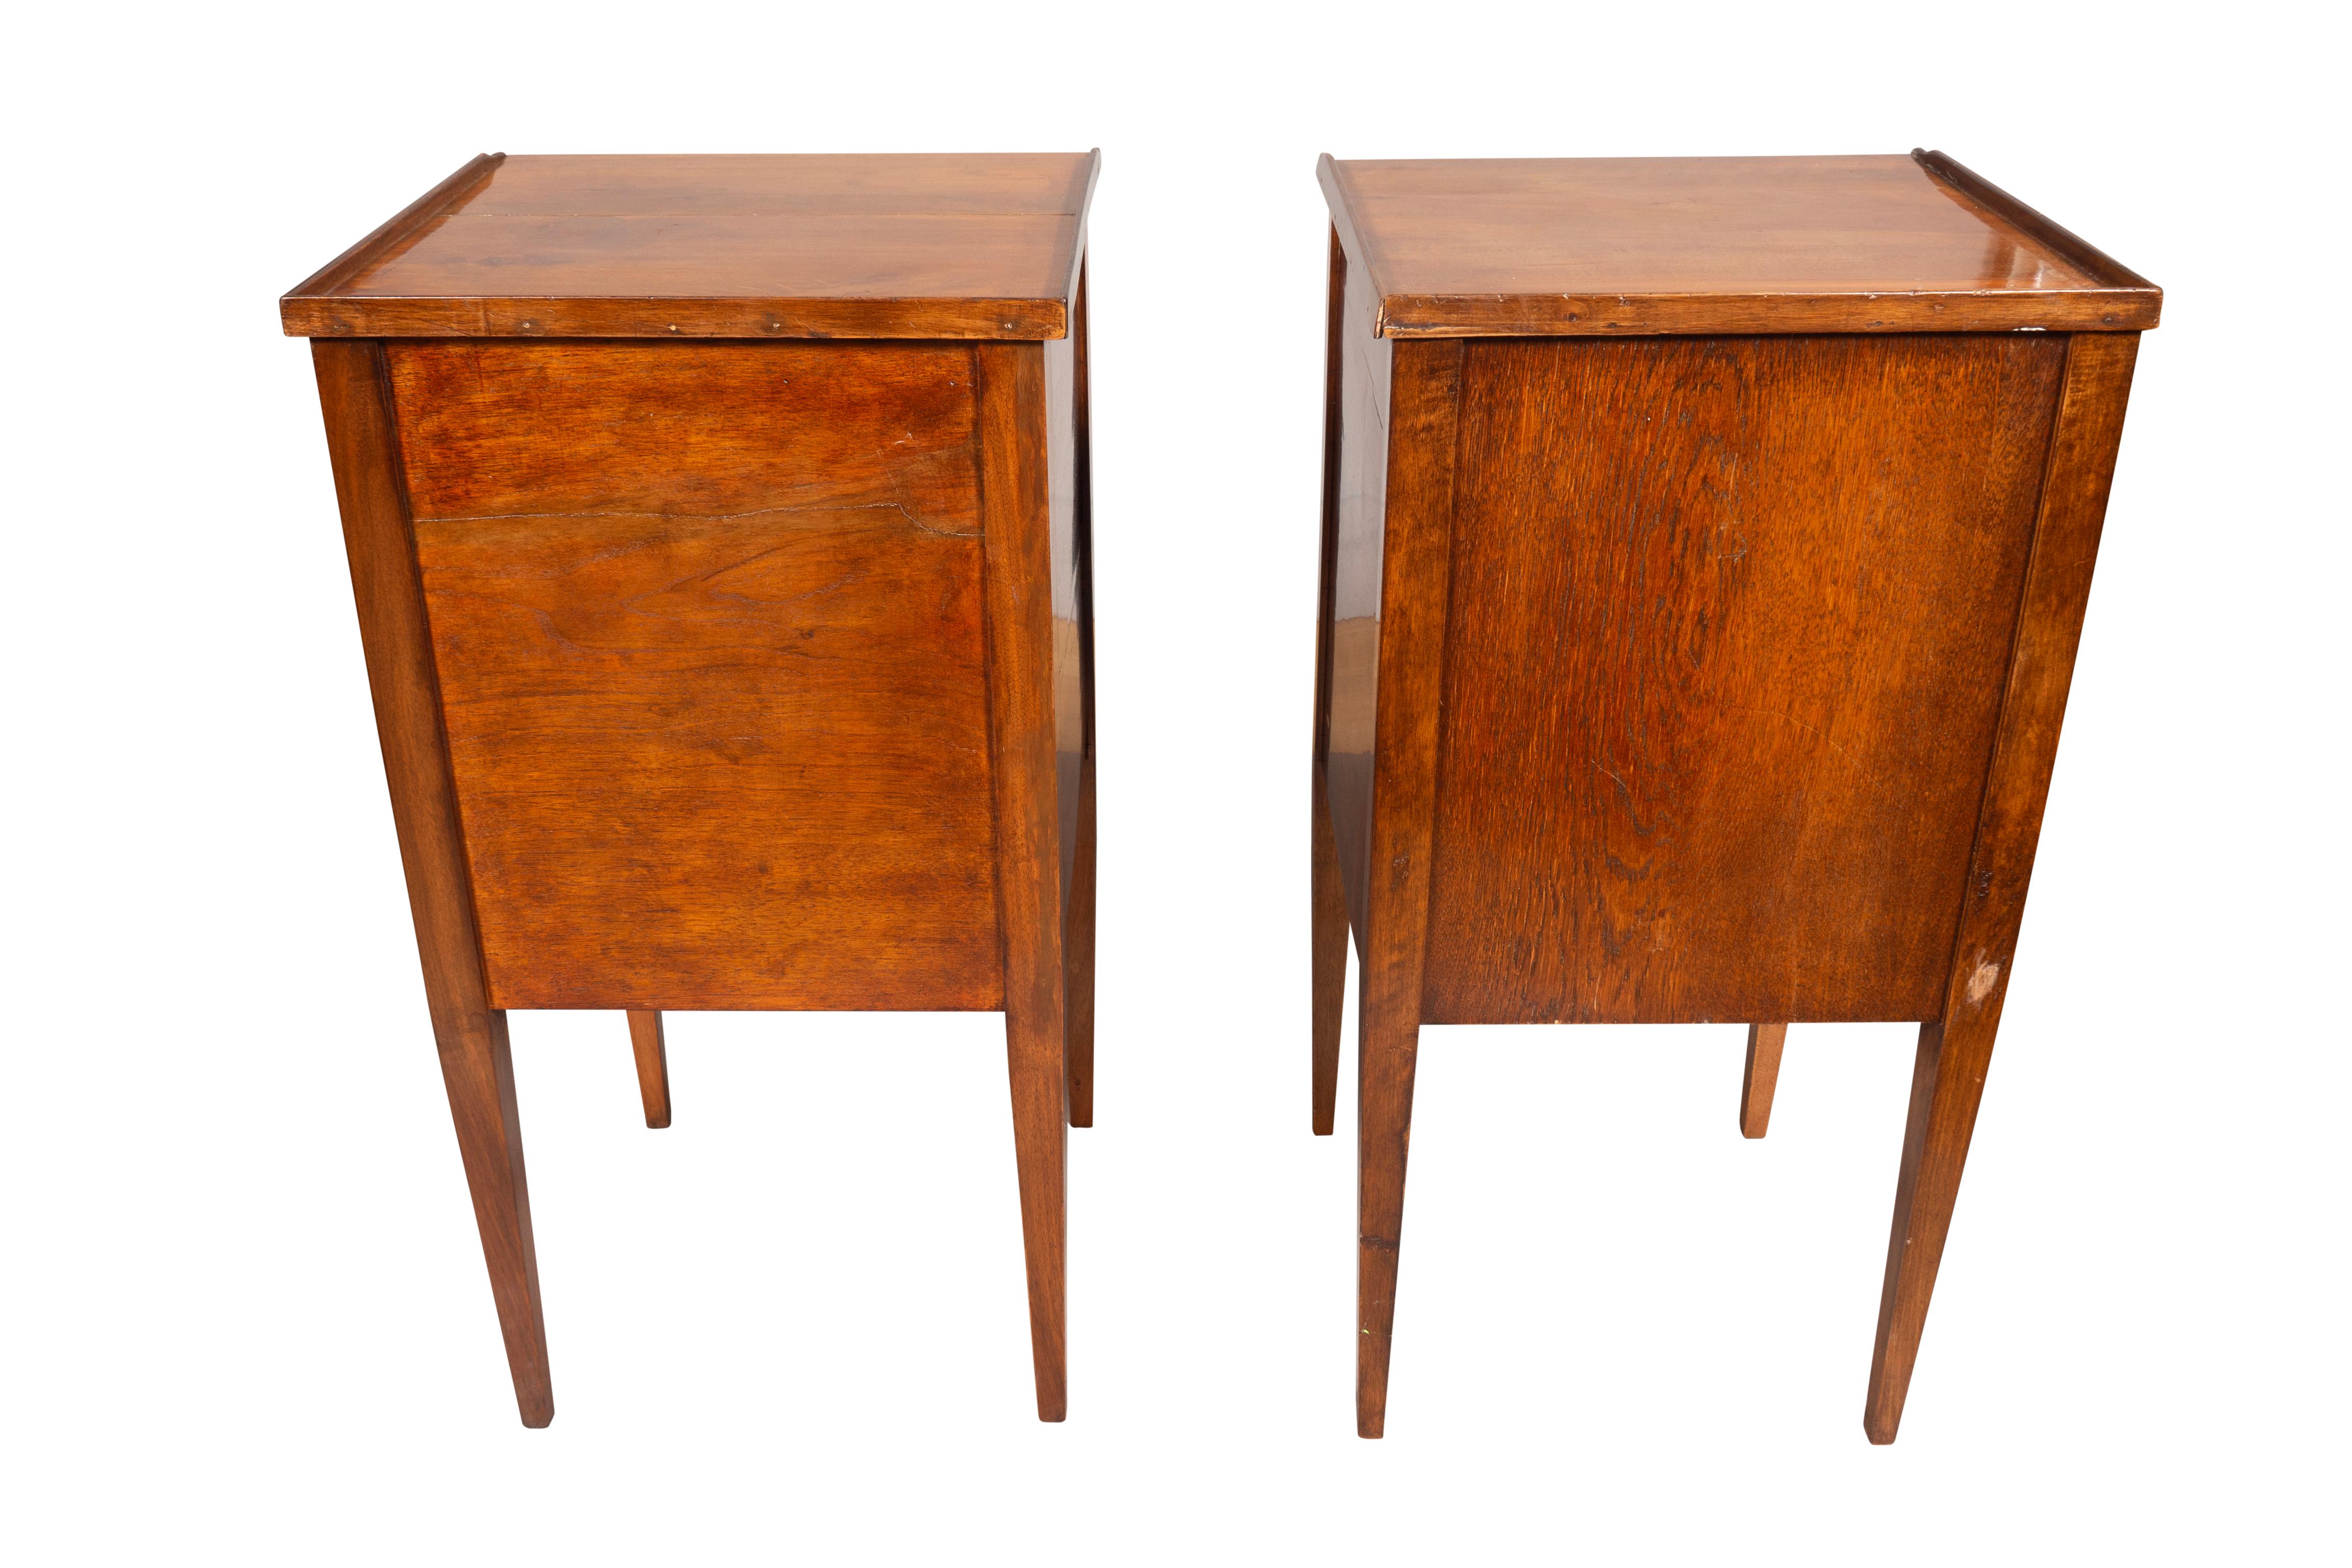 Pair Of Italian Neoclassic Style Walnut Side Tables In Good Condition For Sale In Essex, MA